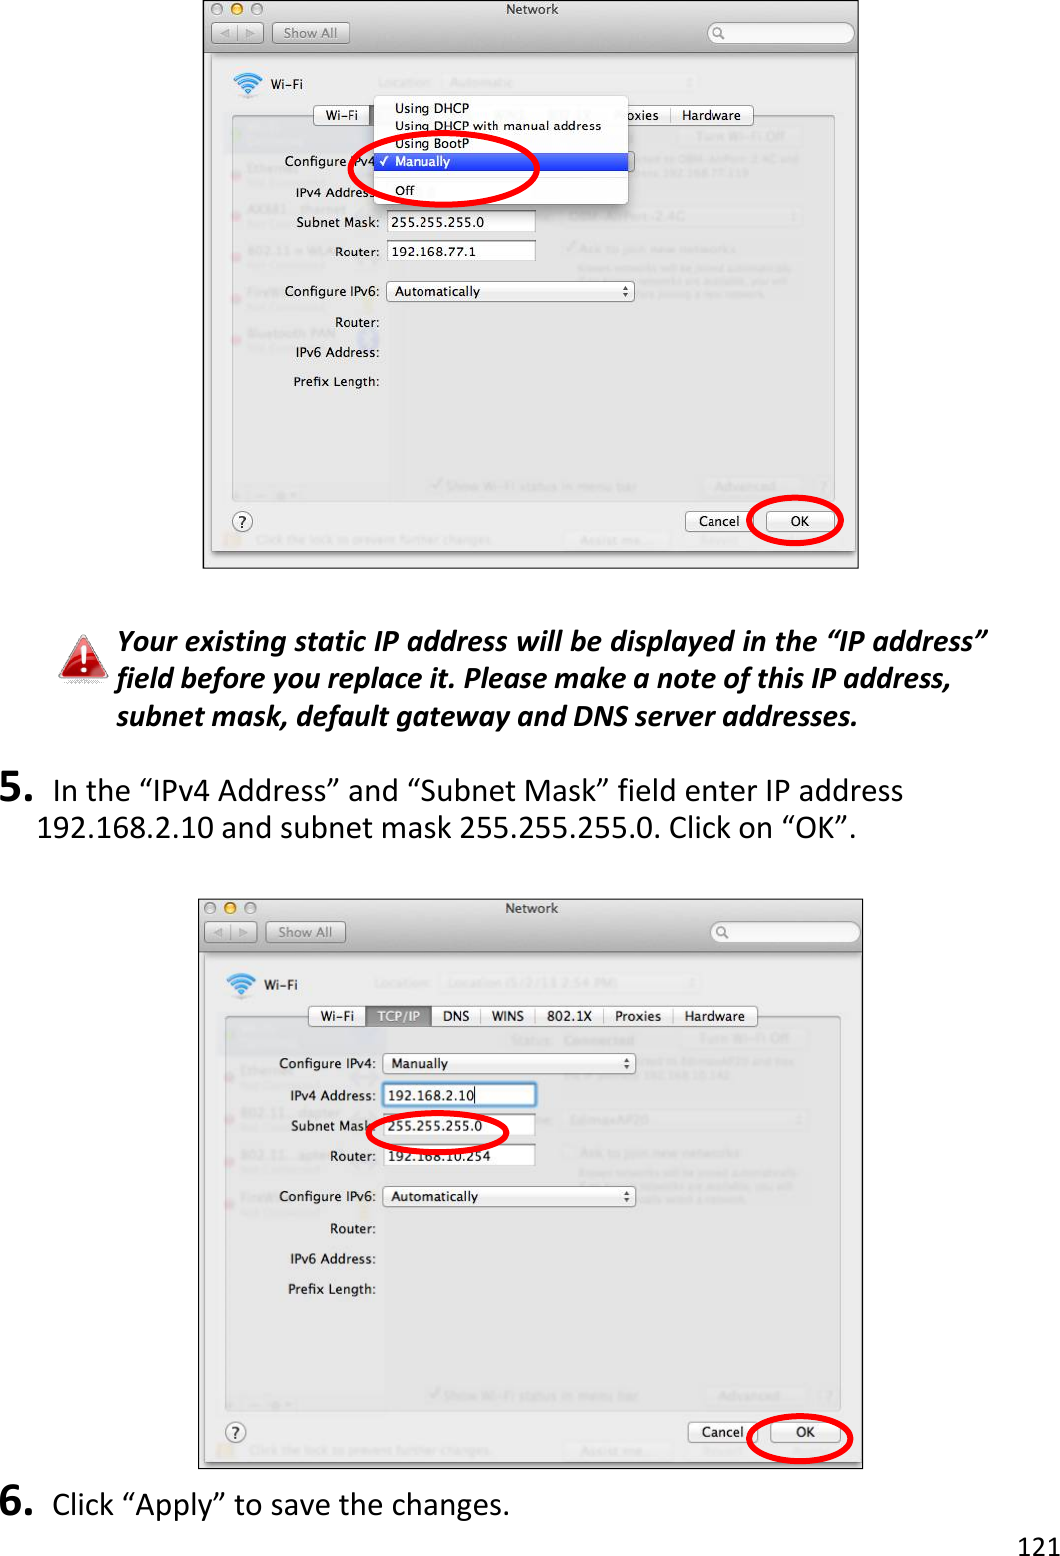 121    Your existing static IP address will be displayed in the “IP address” field before you replace it. Please make a note of this IP address, subnet mask, default gateway and DNS server addresses.  5.   In the “IPv4 Address” and “Subnet Mask” field enter IP address 192.168.2.10 and subnet mask 255.255.255.0. Click on “OK”.   6.  Click “Apply” to save the changes. 